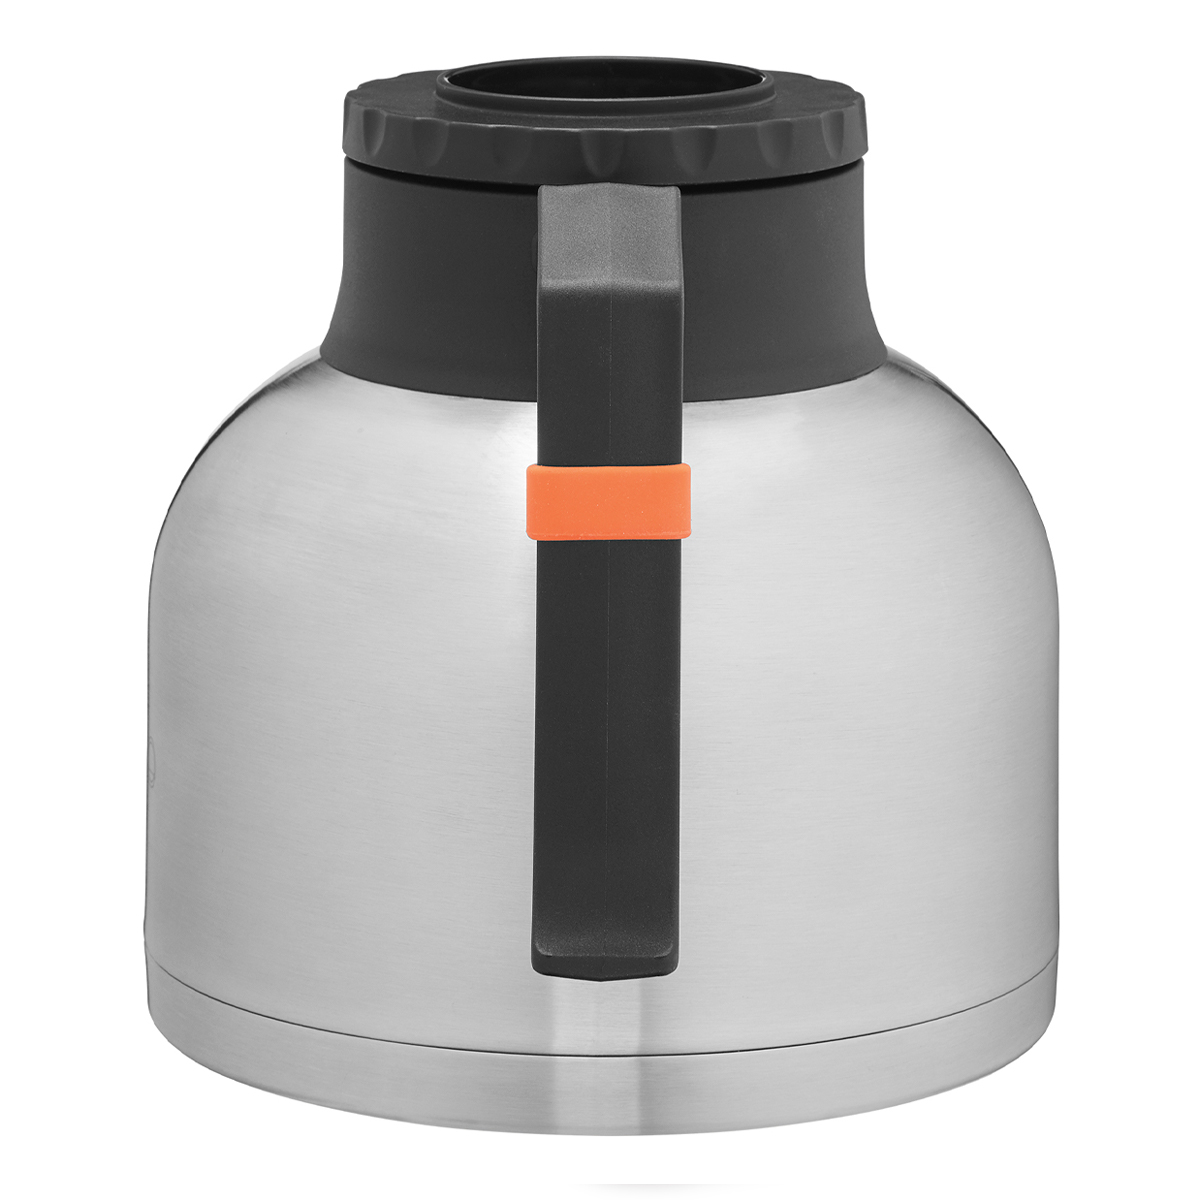 https://www.waringcommercialproducts.com/files/products/wtc64-waring-thermal-carafe-inset-2-1200x1200.jpg